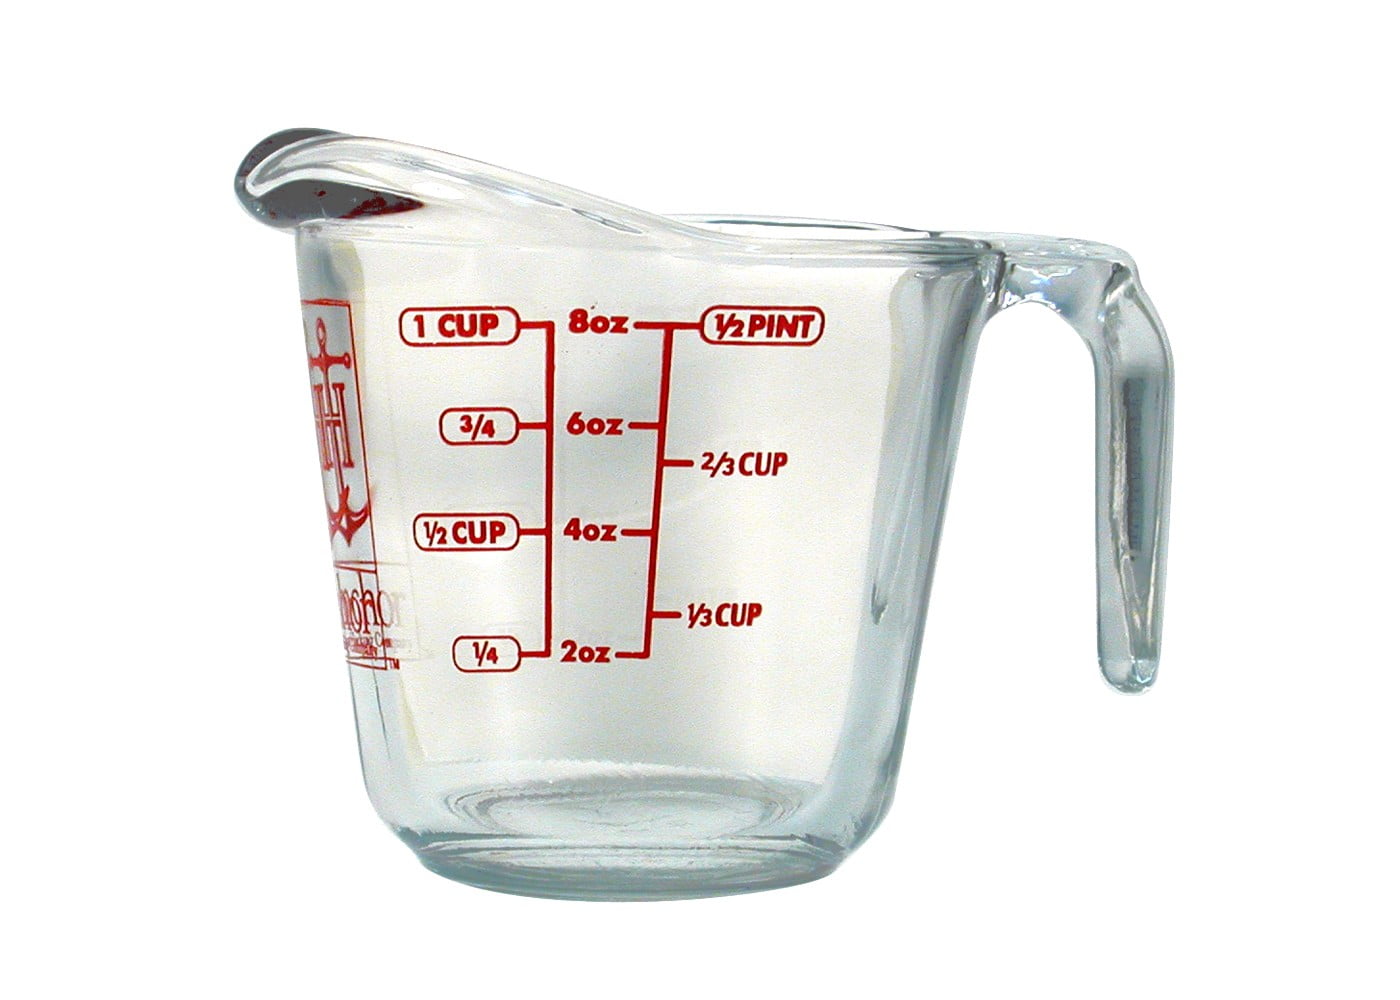 Pictures of measuring cups